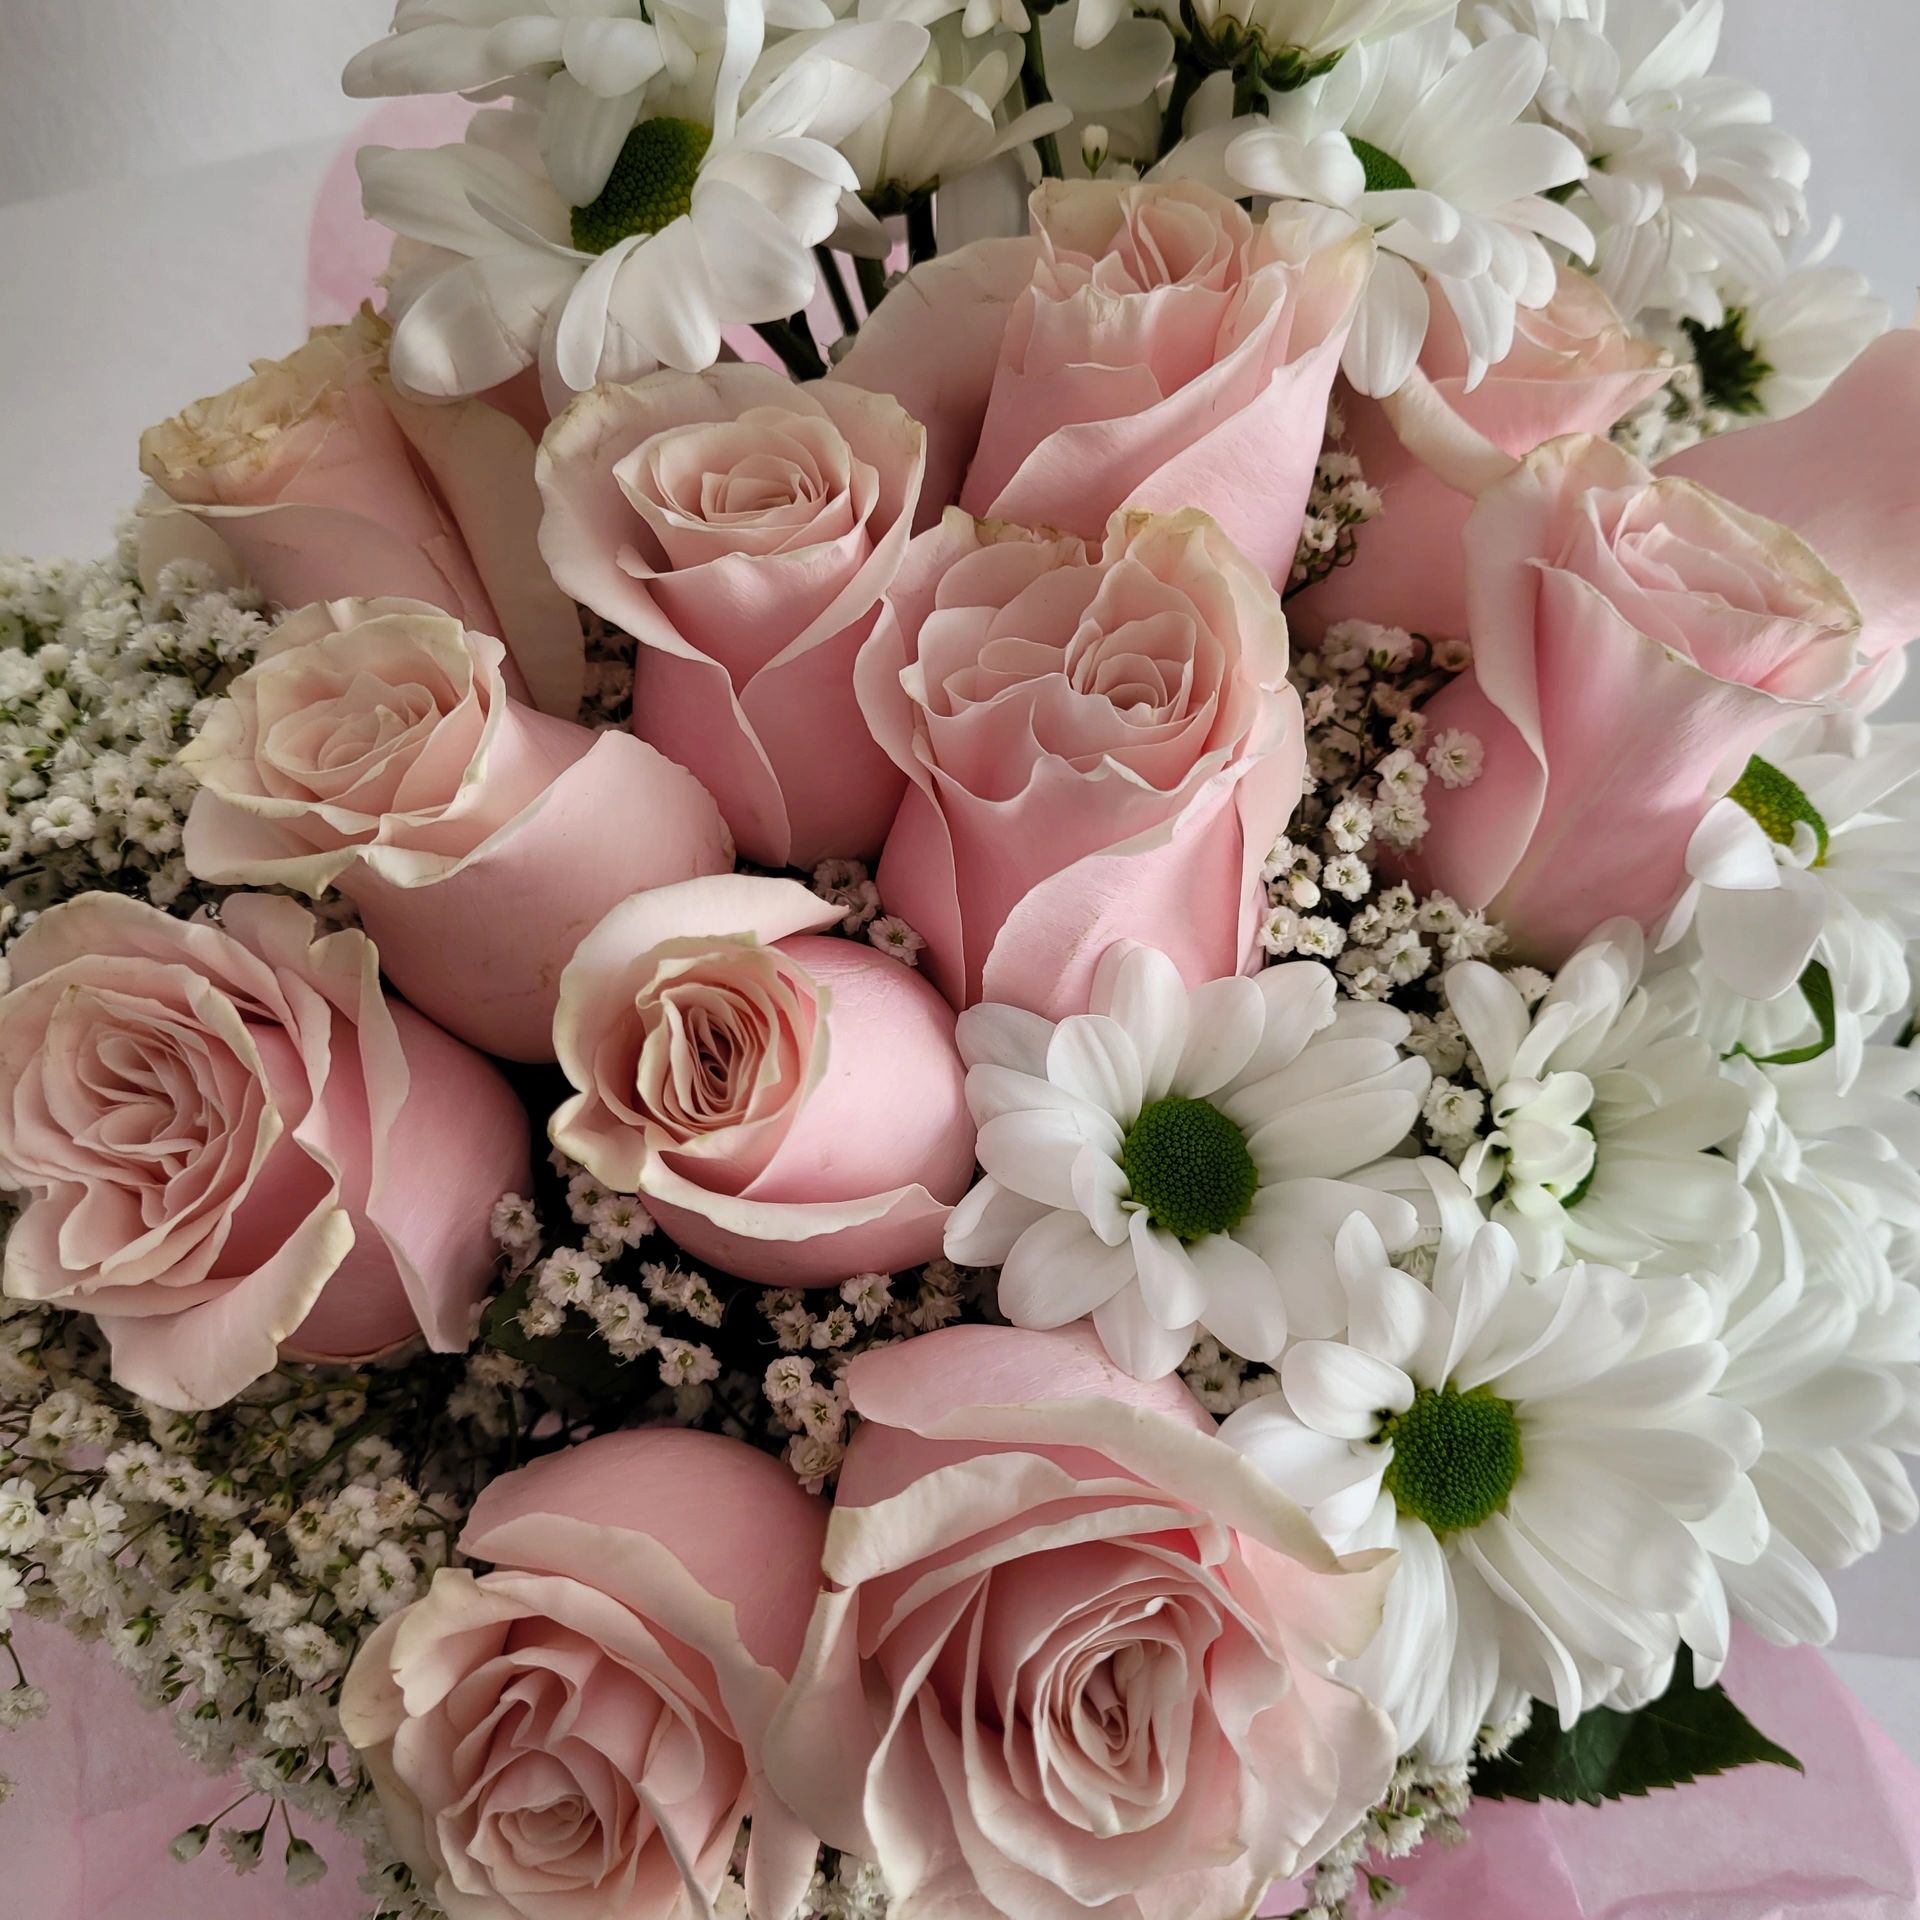 Pink roses and white mums floral arrangement